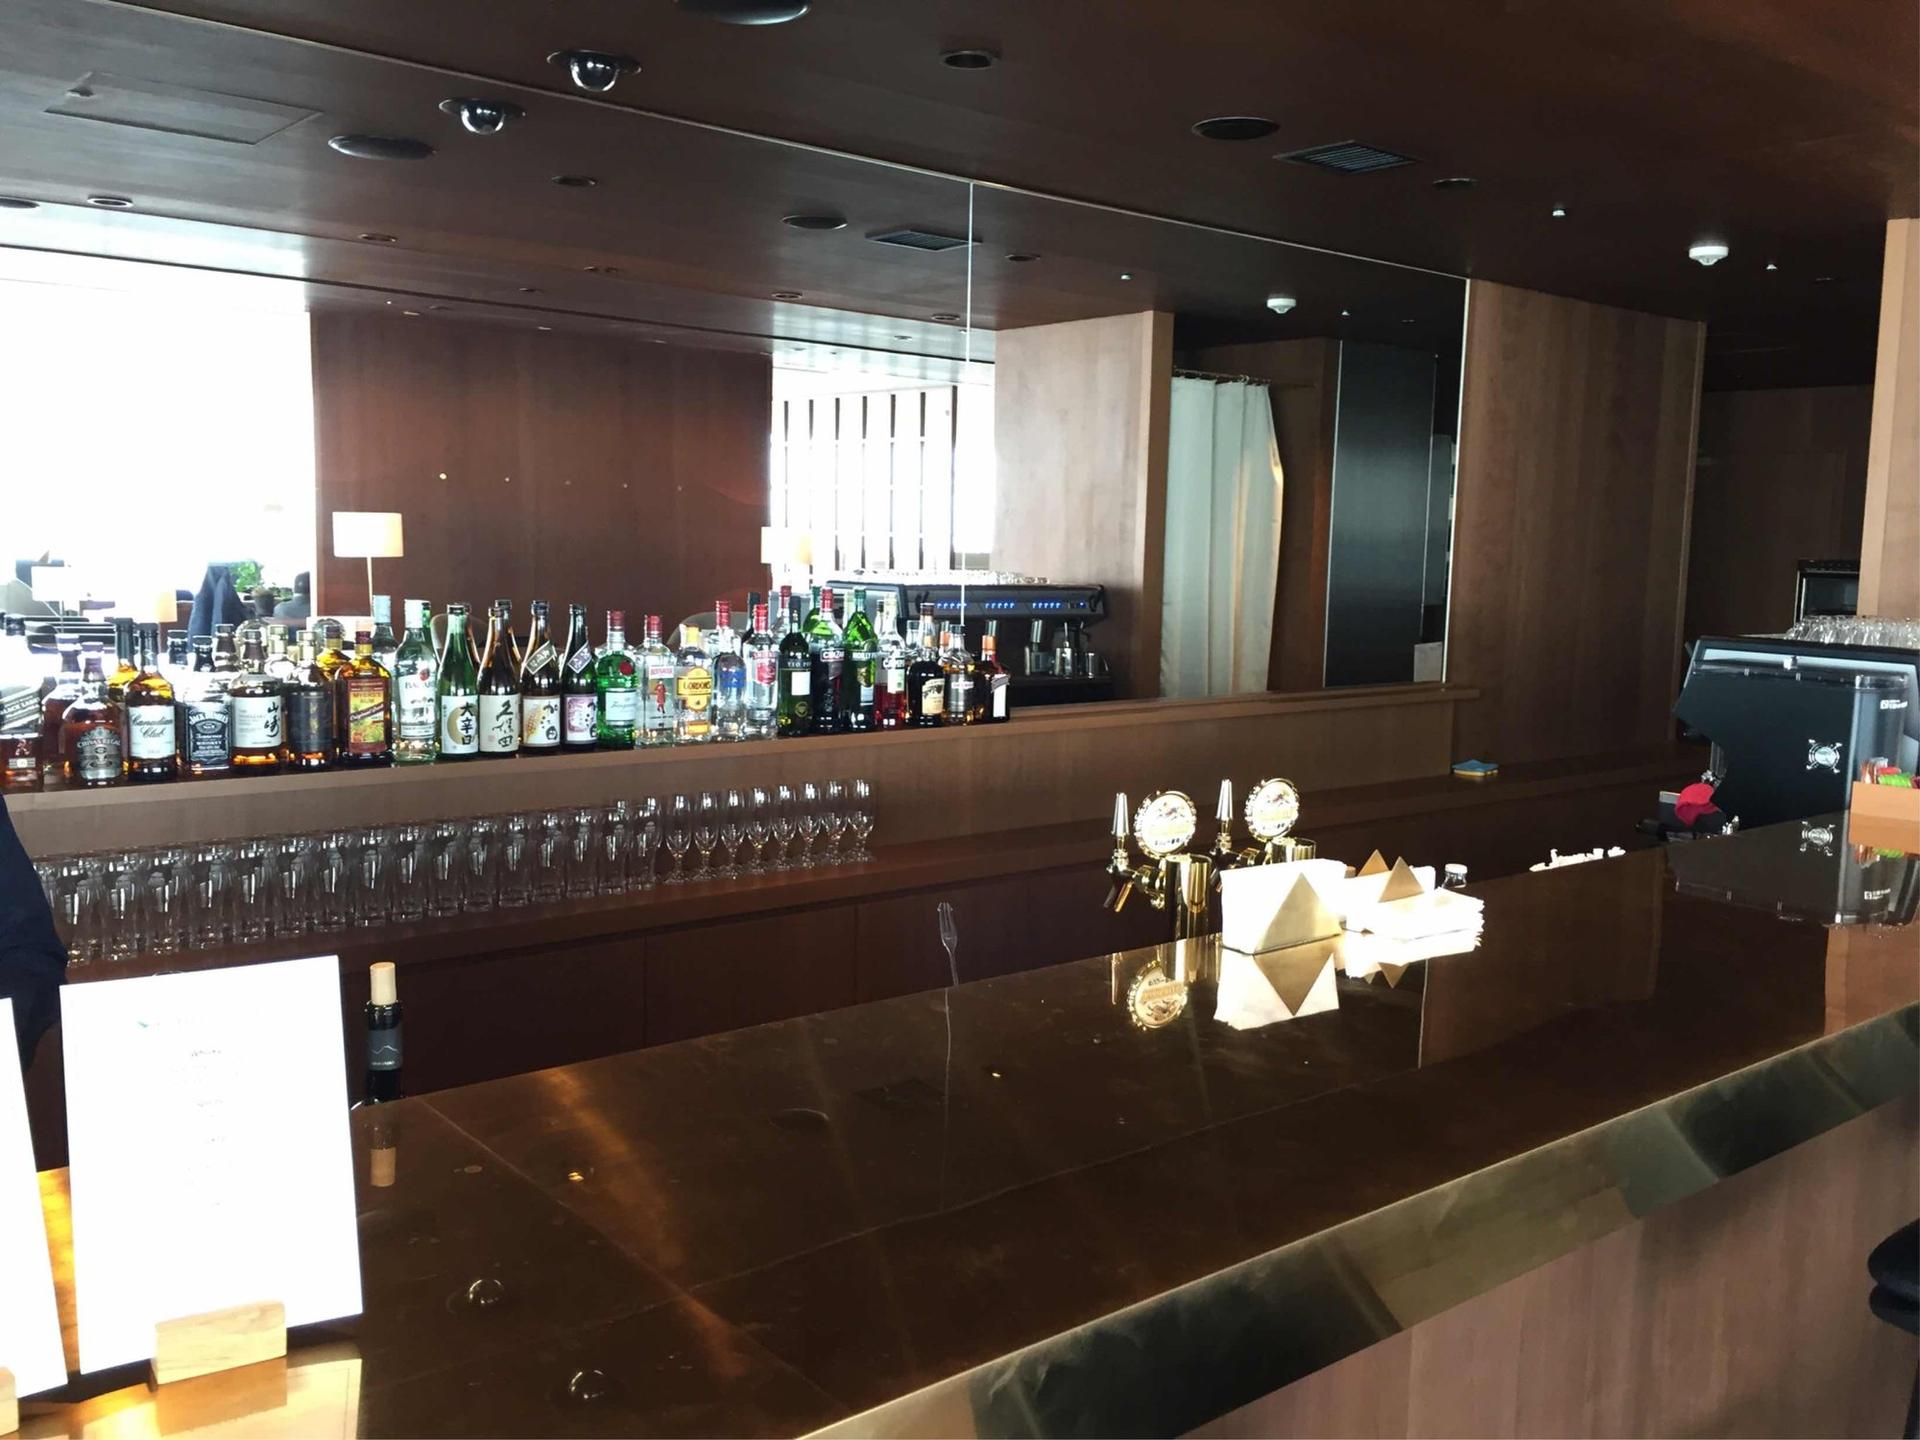 Cathay Pacific Lounge image 10 of 49